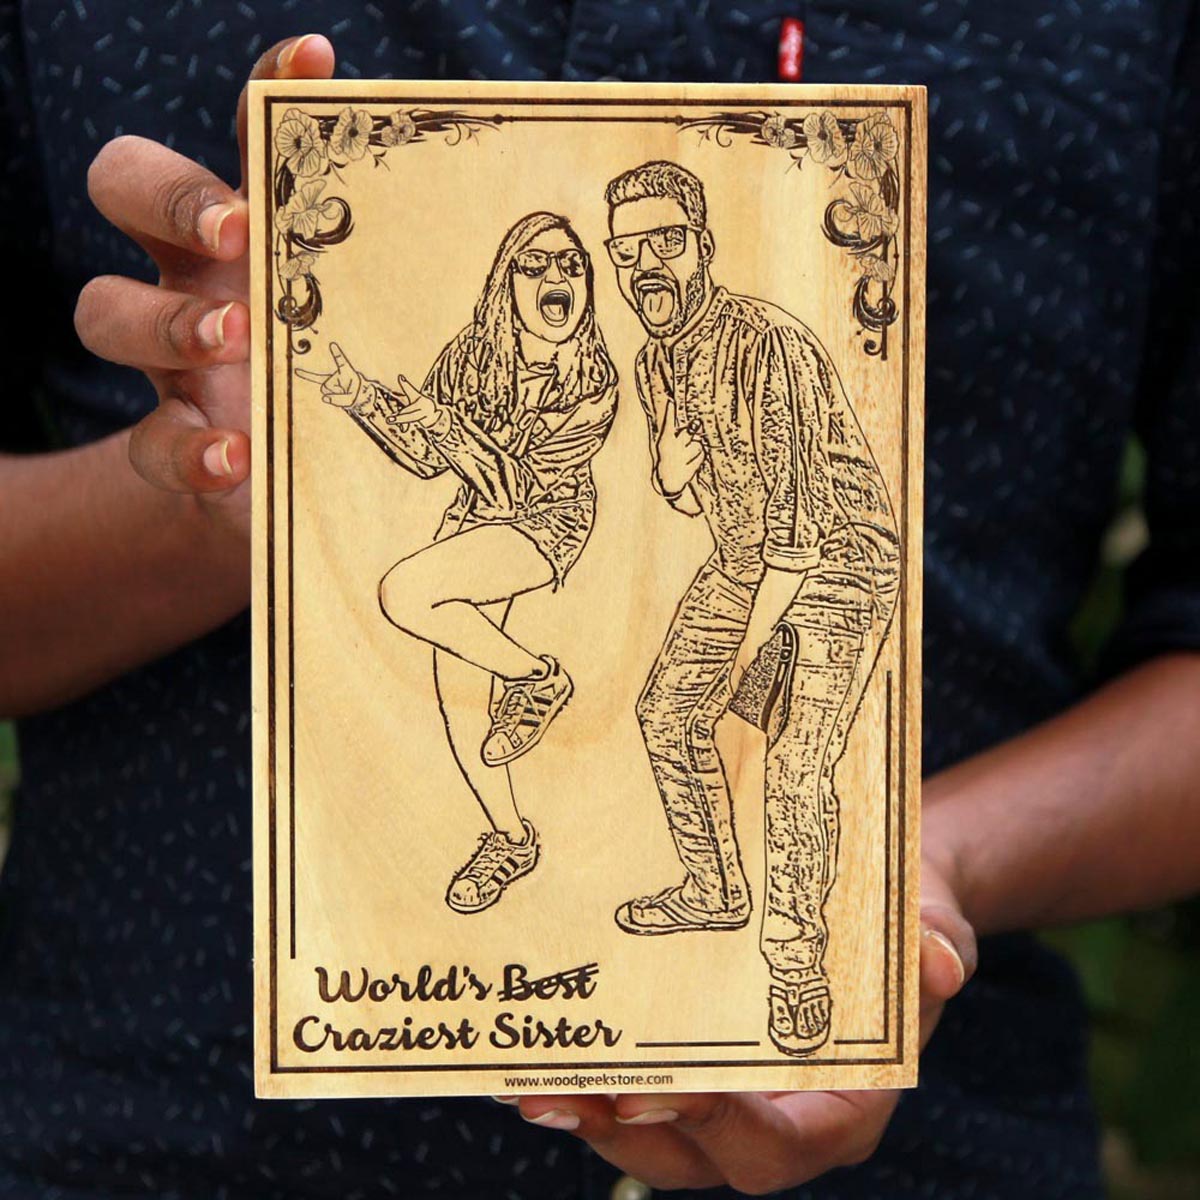 Custom Engraved Wooden Poster For The World's Craziest Sister - This Photo Frame Makes One Of The Best Rakhi Gifts For Sister - Buy More Personalized Rakhi Gifts For Brothers And Sisters From The Woodgeek Store